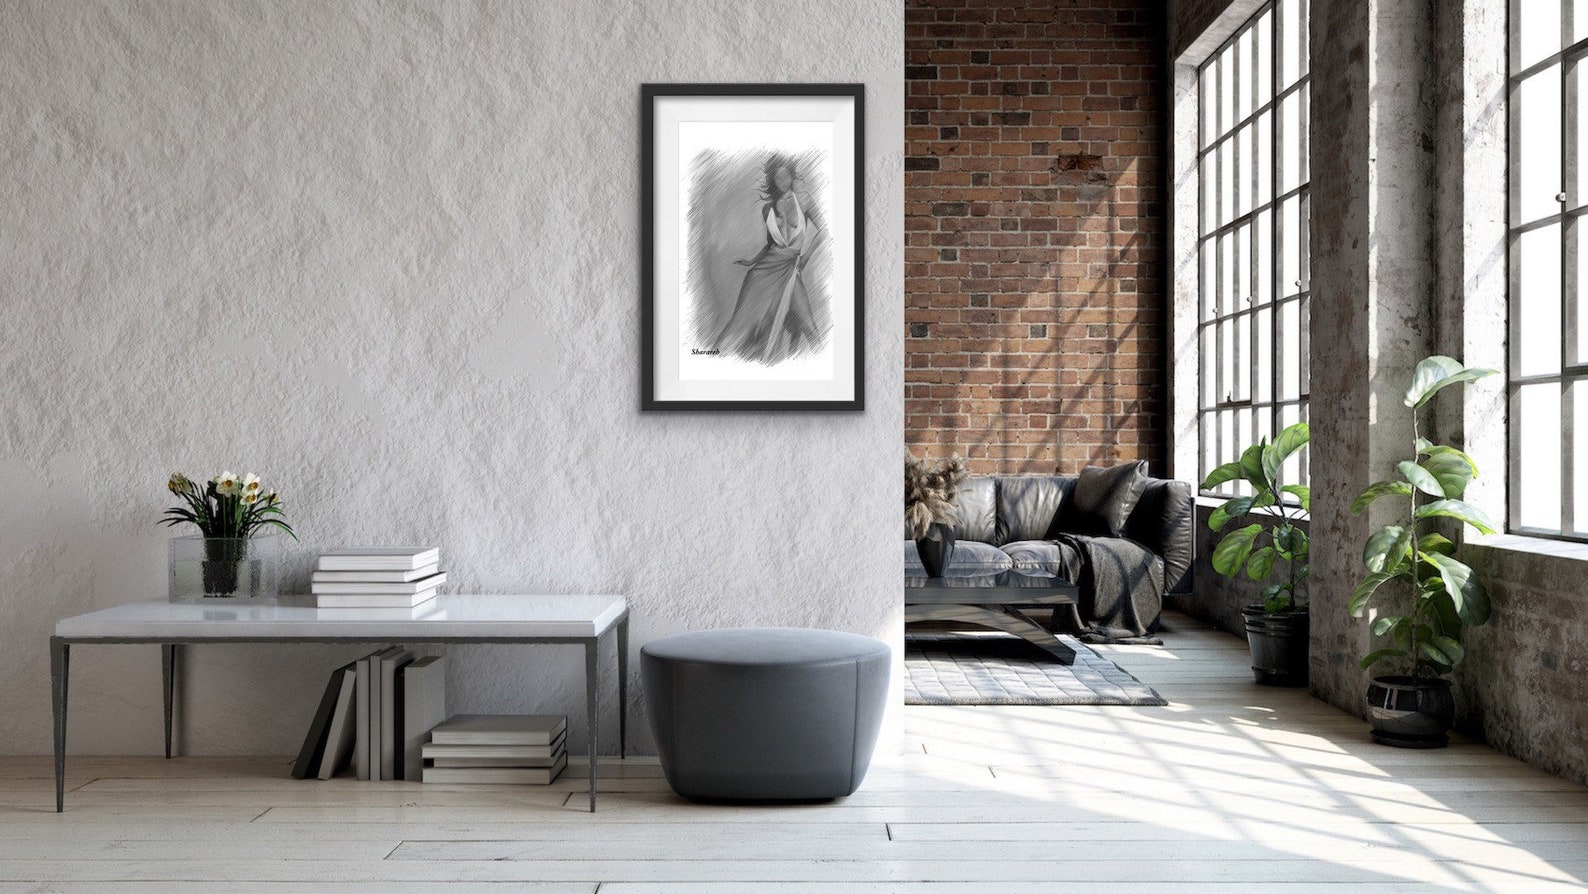 Woman Painting Black and White Art Print on Paper Wall Decor - Etsy